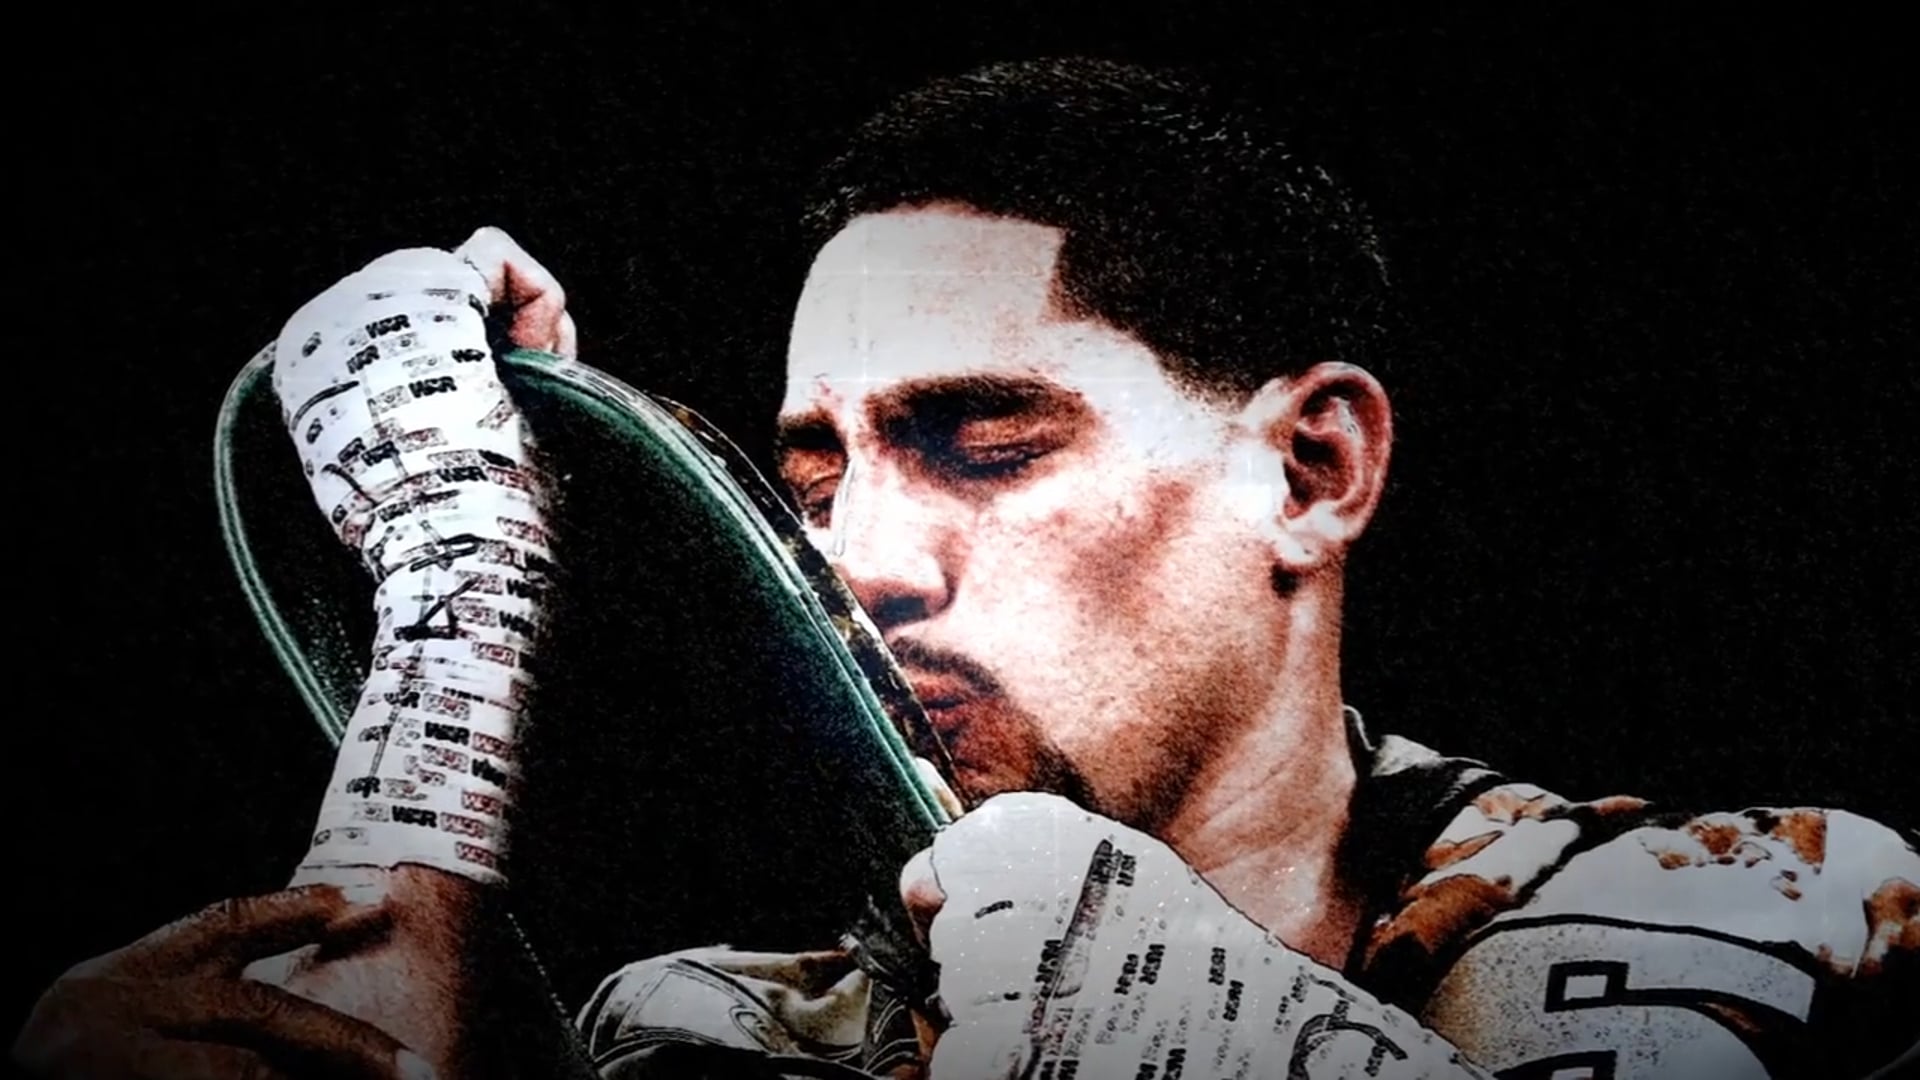 Shifting Gears with Danny Garcia